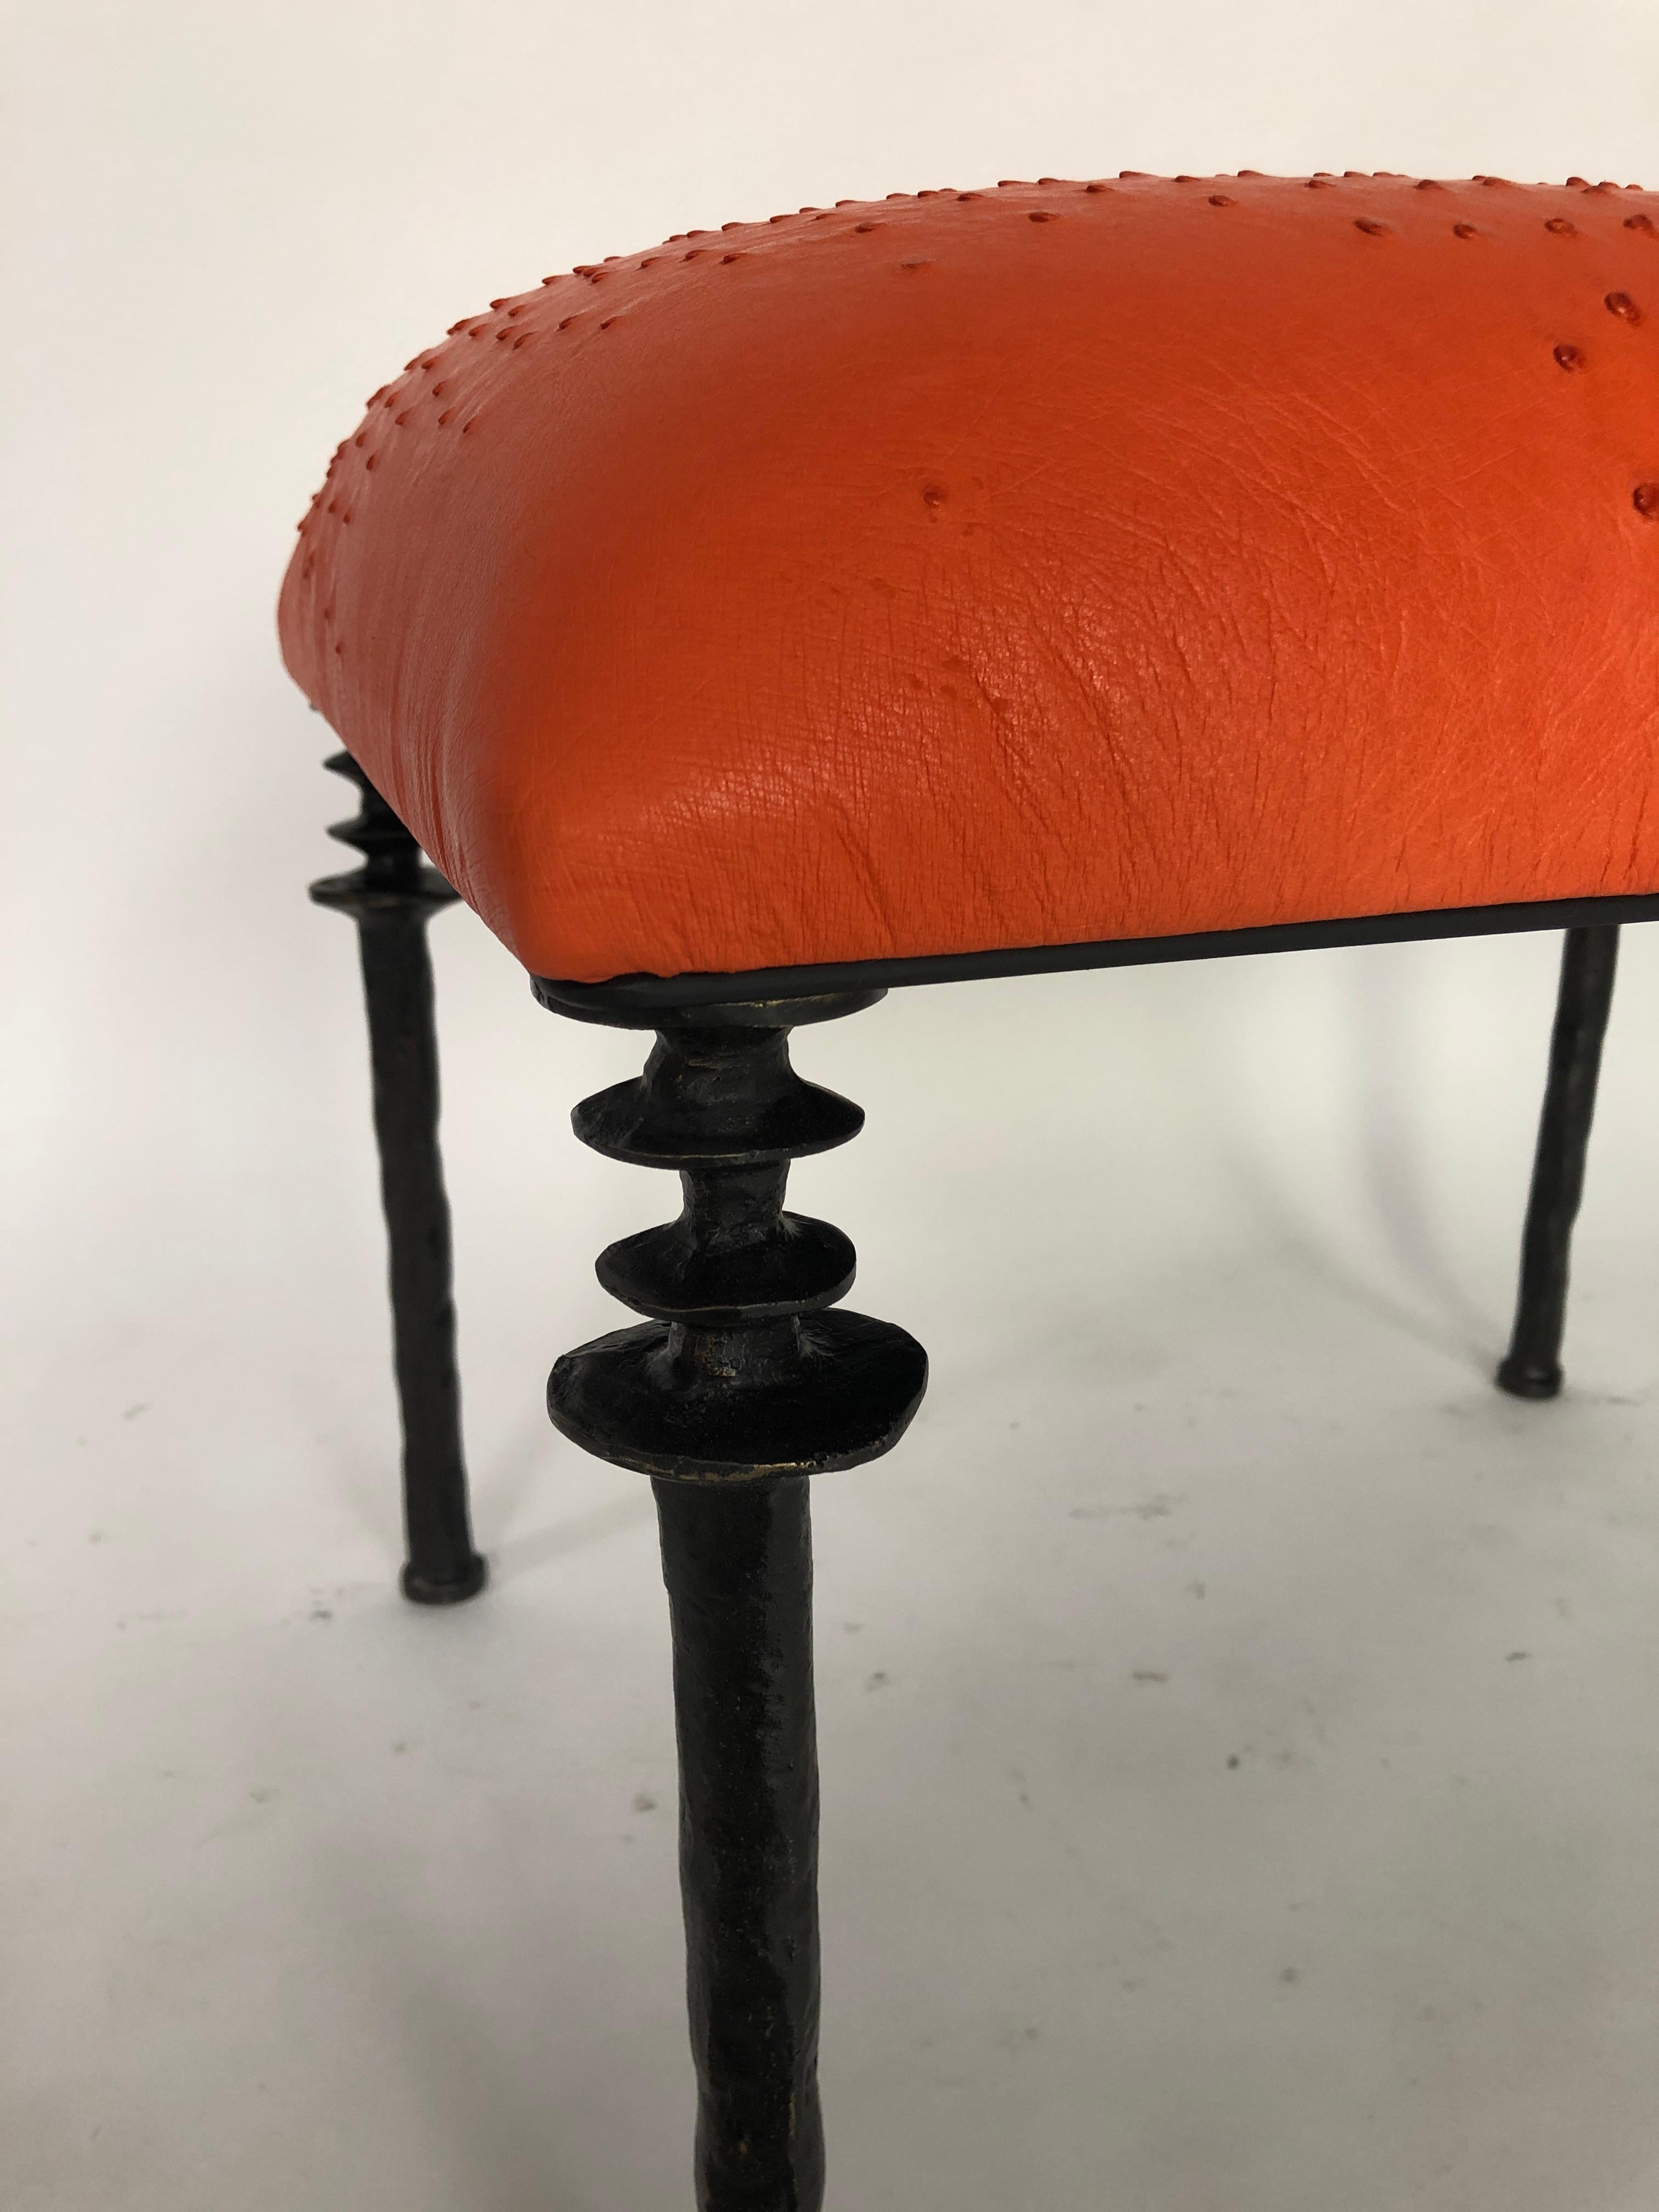 Pair of Sorgue Stools, by Bourgeois Boheme Atelier, Tangerine Ostrich Leather 2